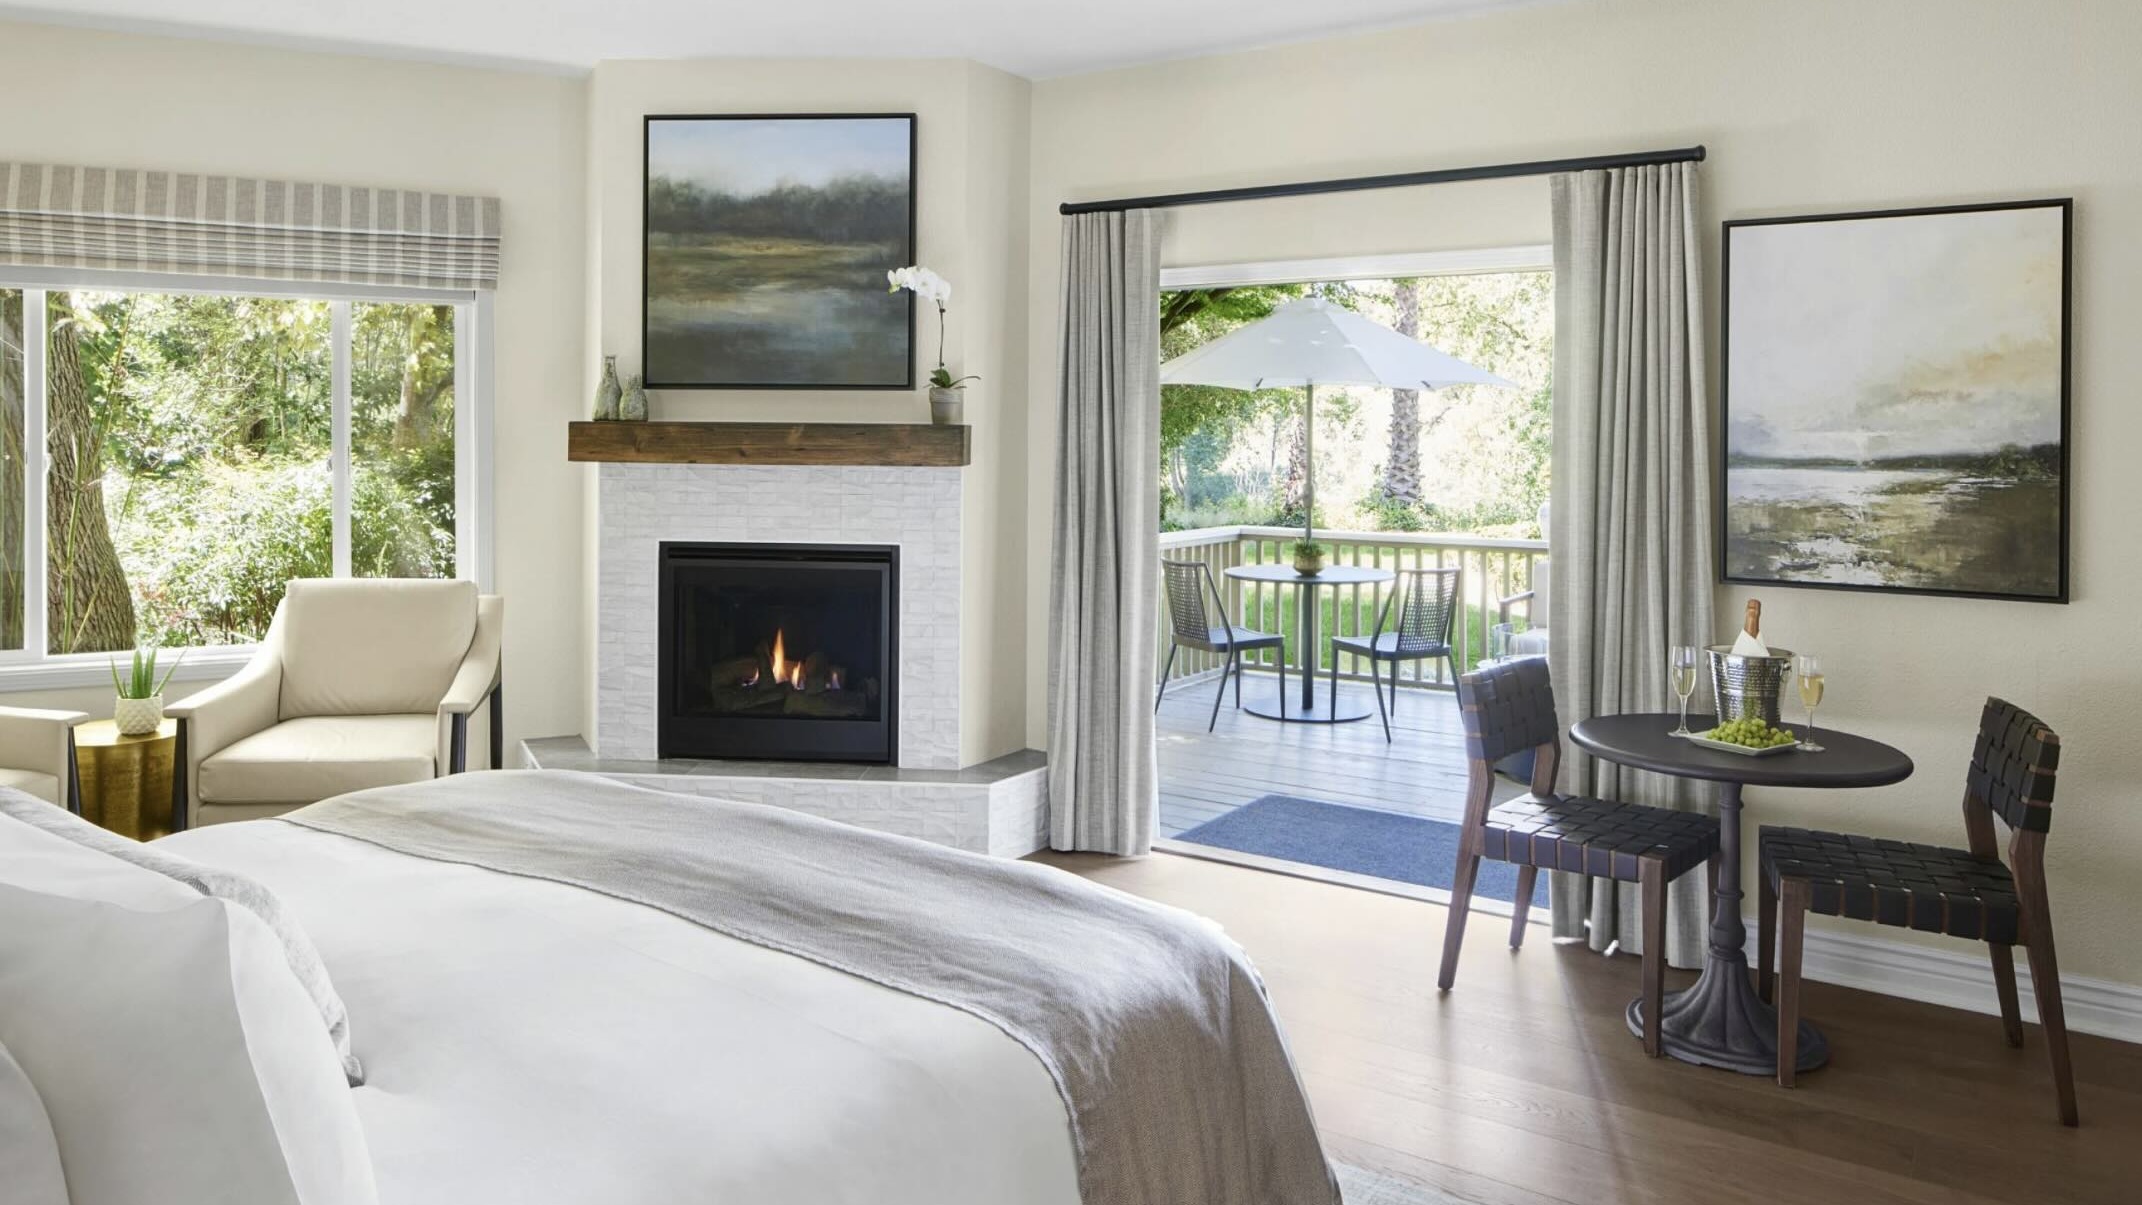 Milliken Creek Inn, Napa is one of the best boutique hotels in Napa Valley